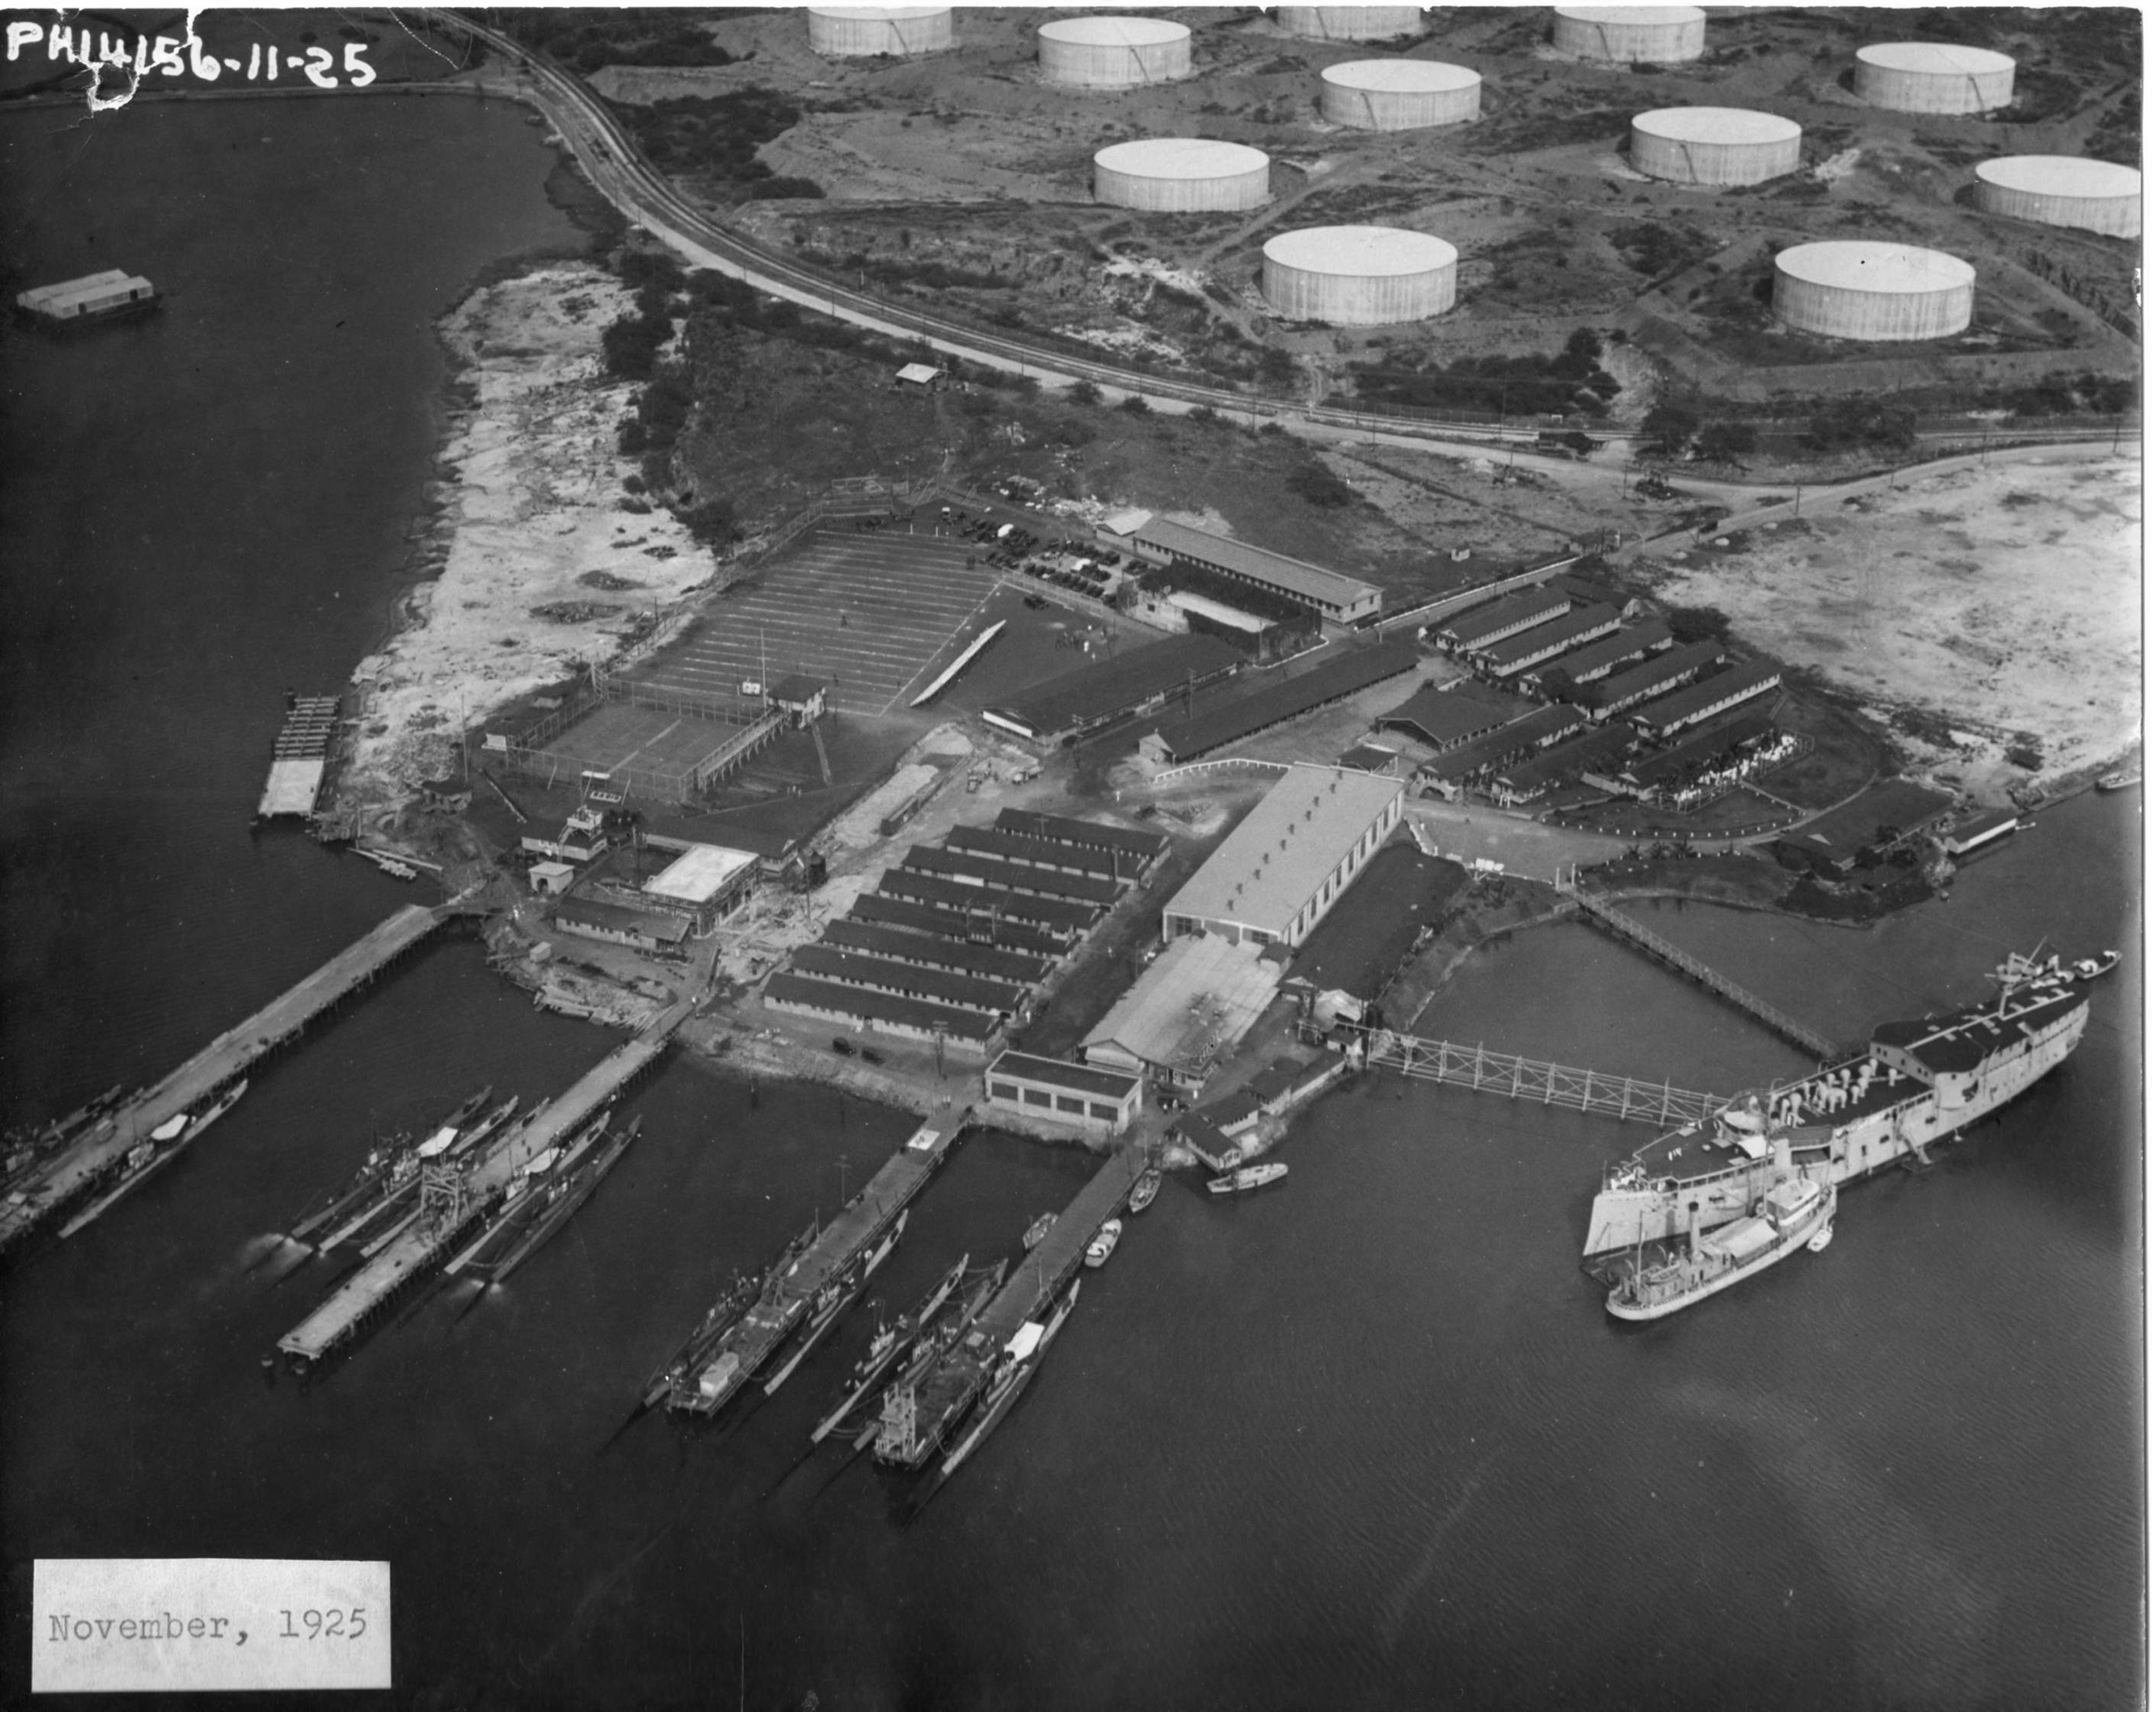 R and S class submarines at the finger piers on Merry Point at the Pearl Harbor submarine base, Pearl Harbor, Hawaii, Nov 1925. The ex-USS Chicago, converted to a barracks ship, is at right.